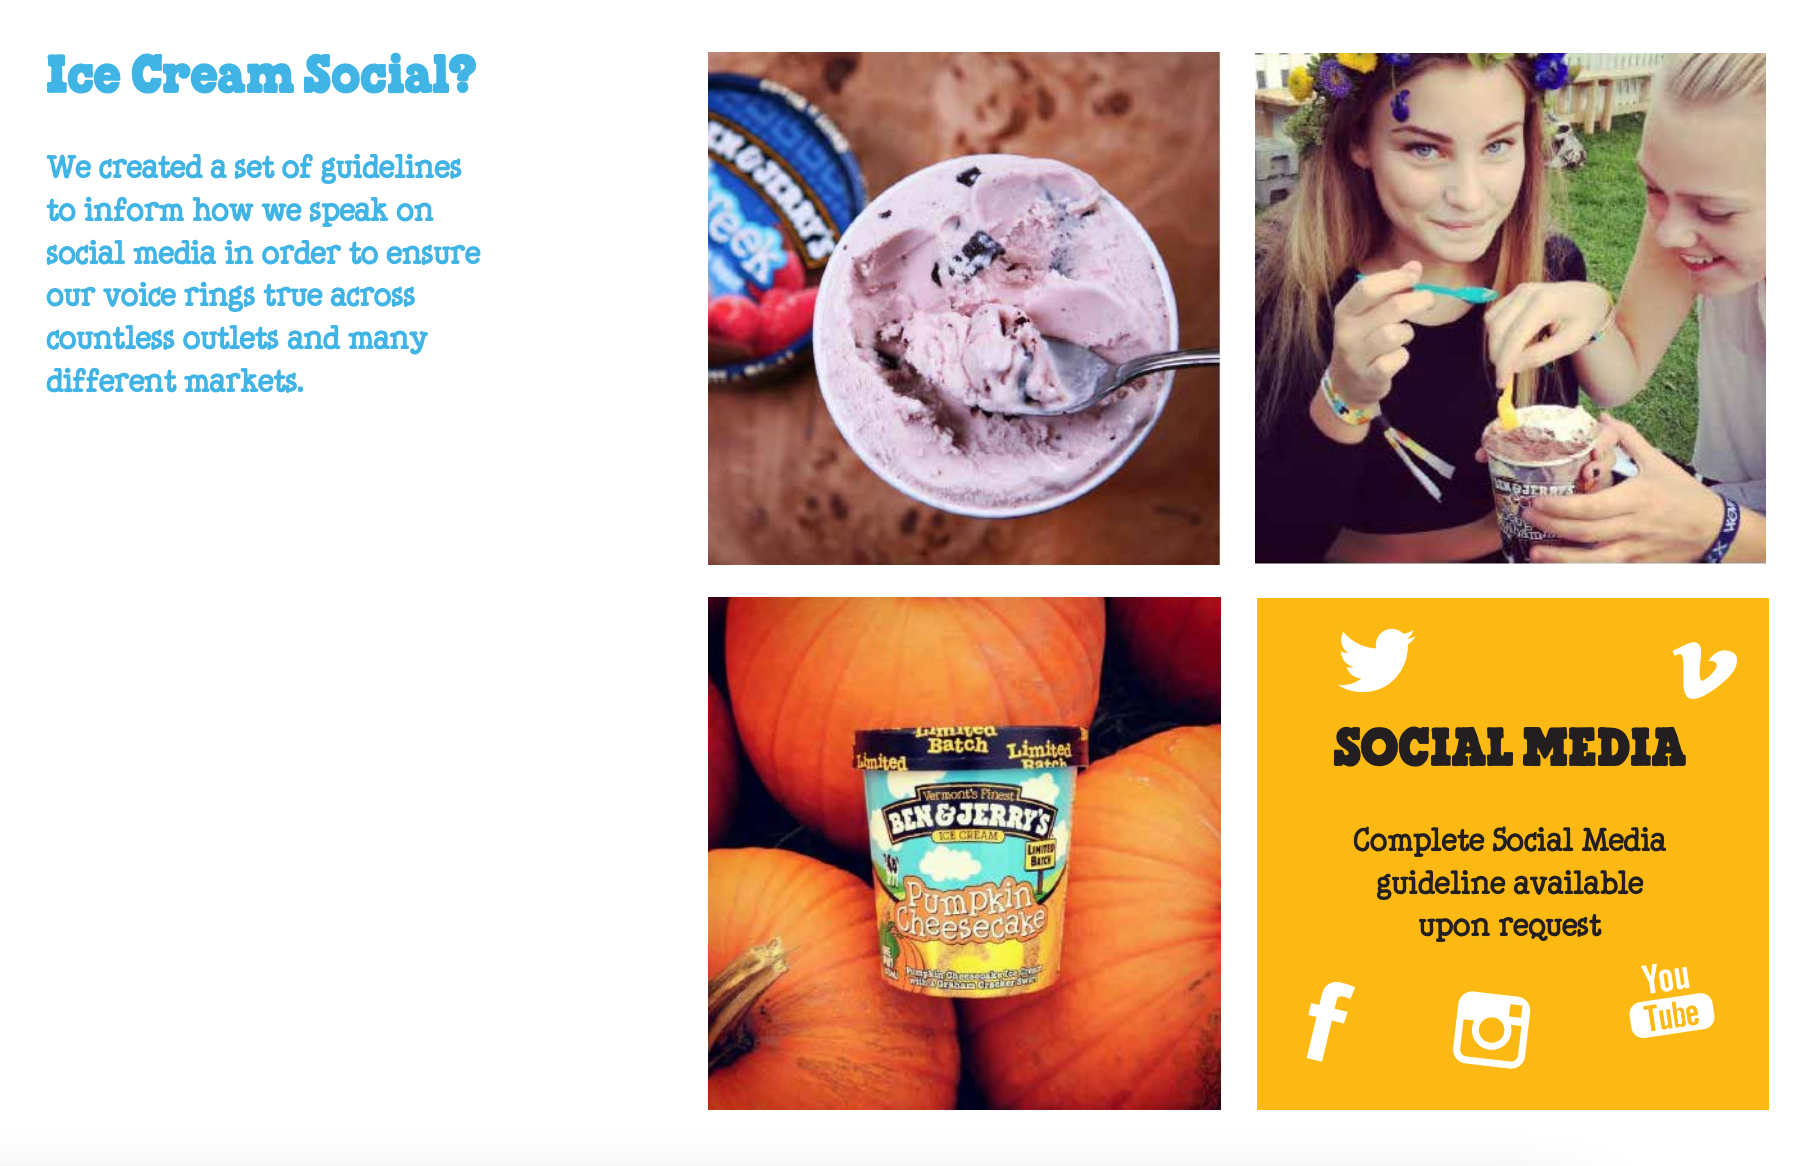 Ben & Jerry’s social media photography guidelines, including example images such as pumpkin cheesecake ice cream on top of pumpkins